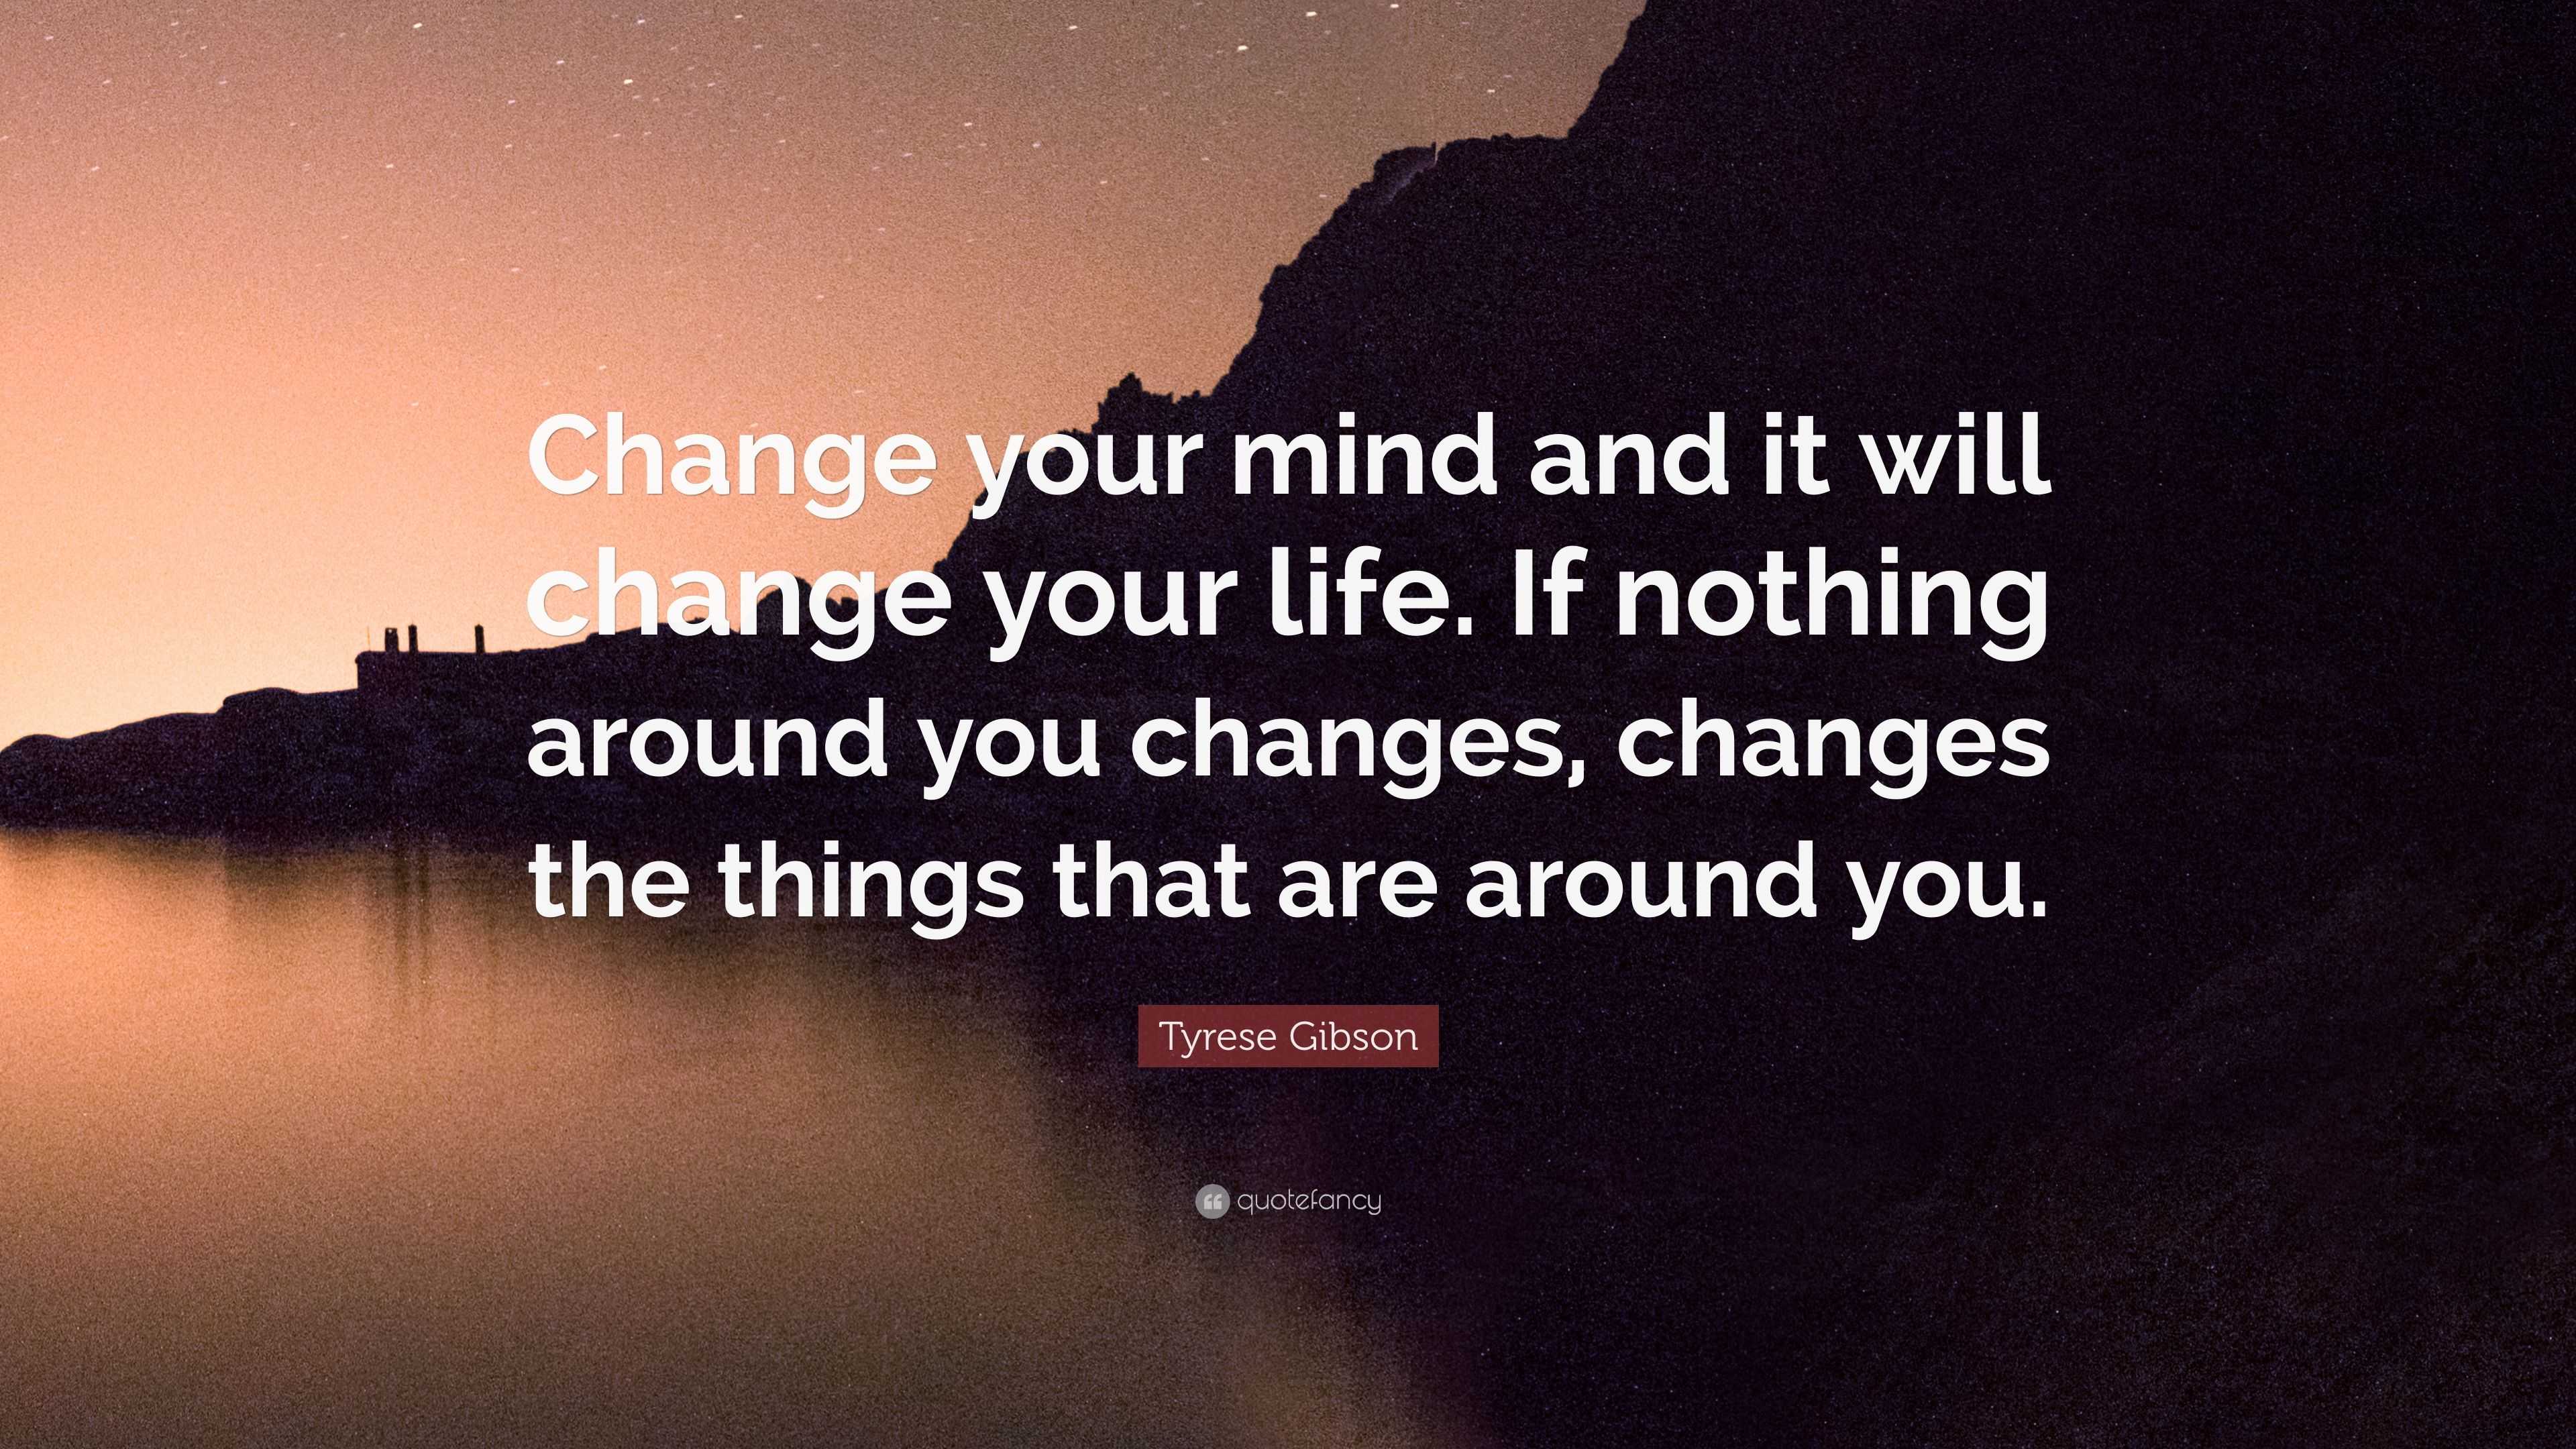 Tyrese Gibson Quote: “Change your mind and it will change your life. If